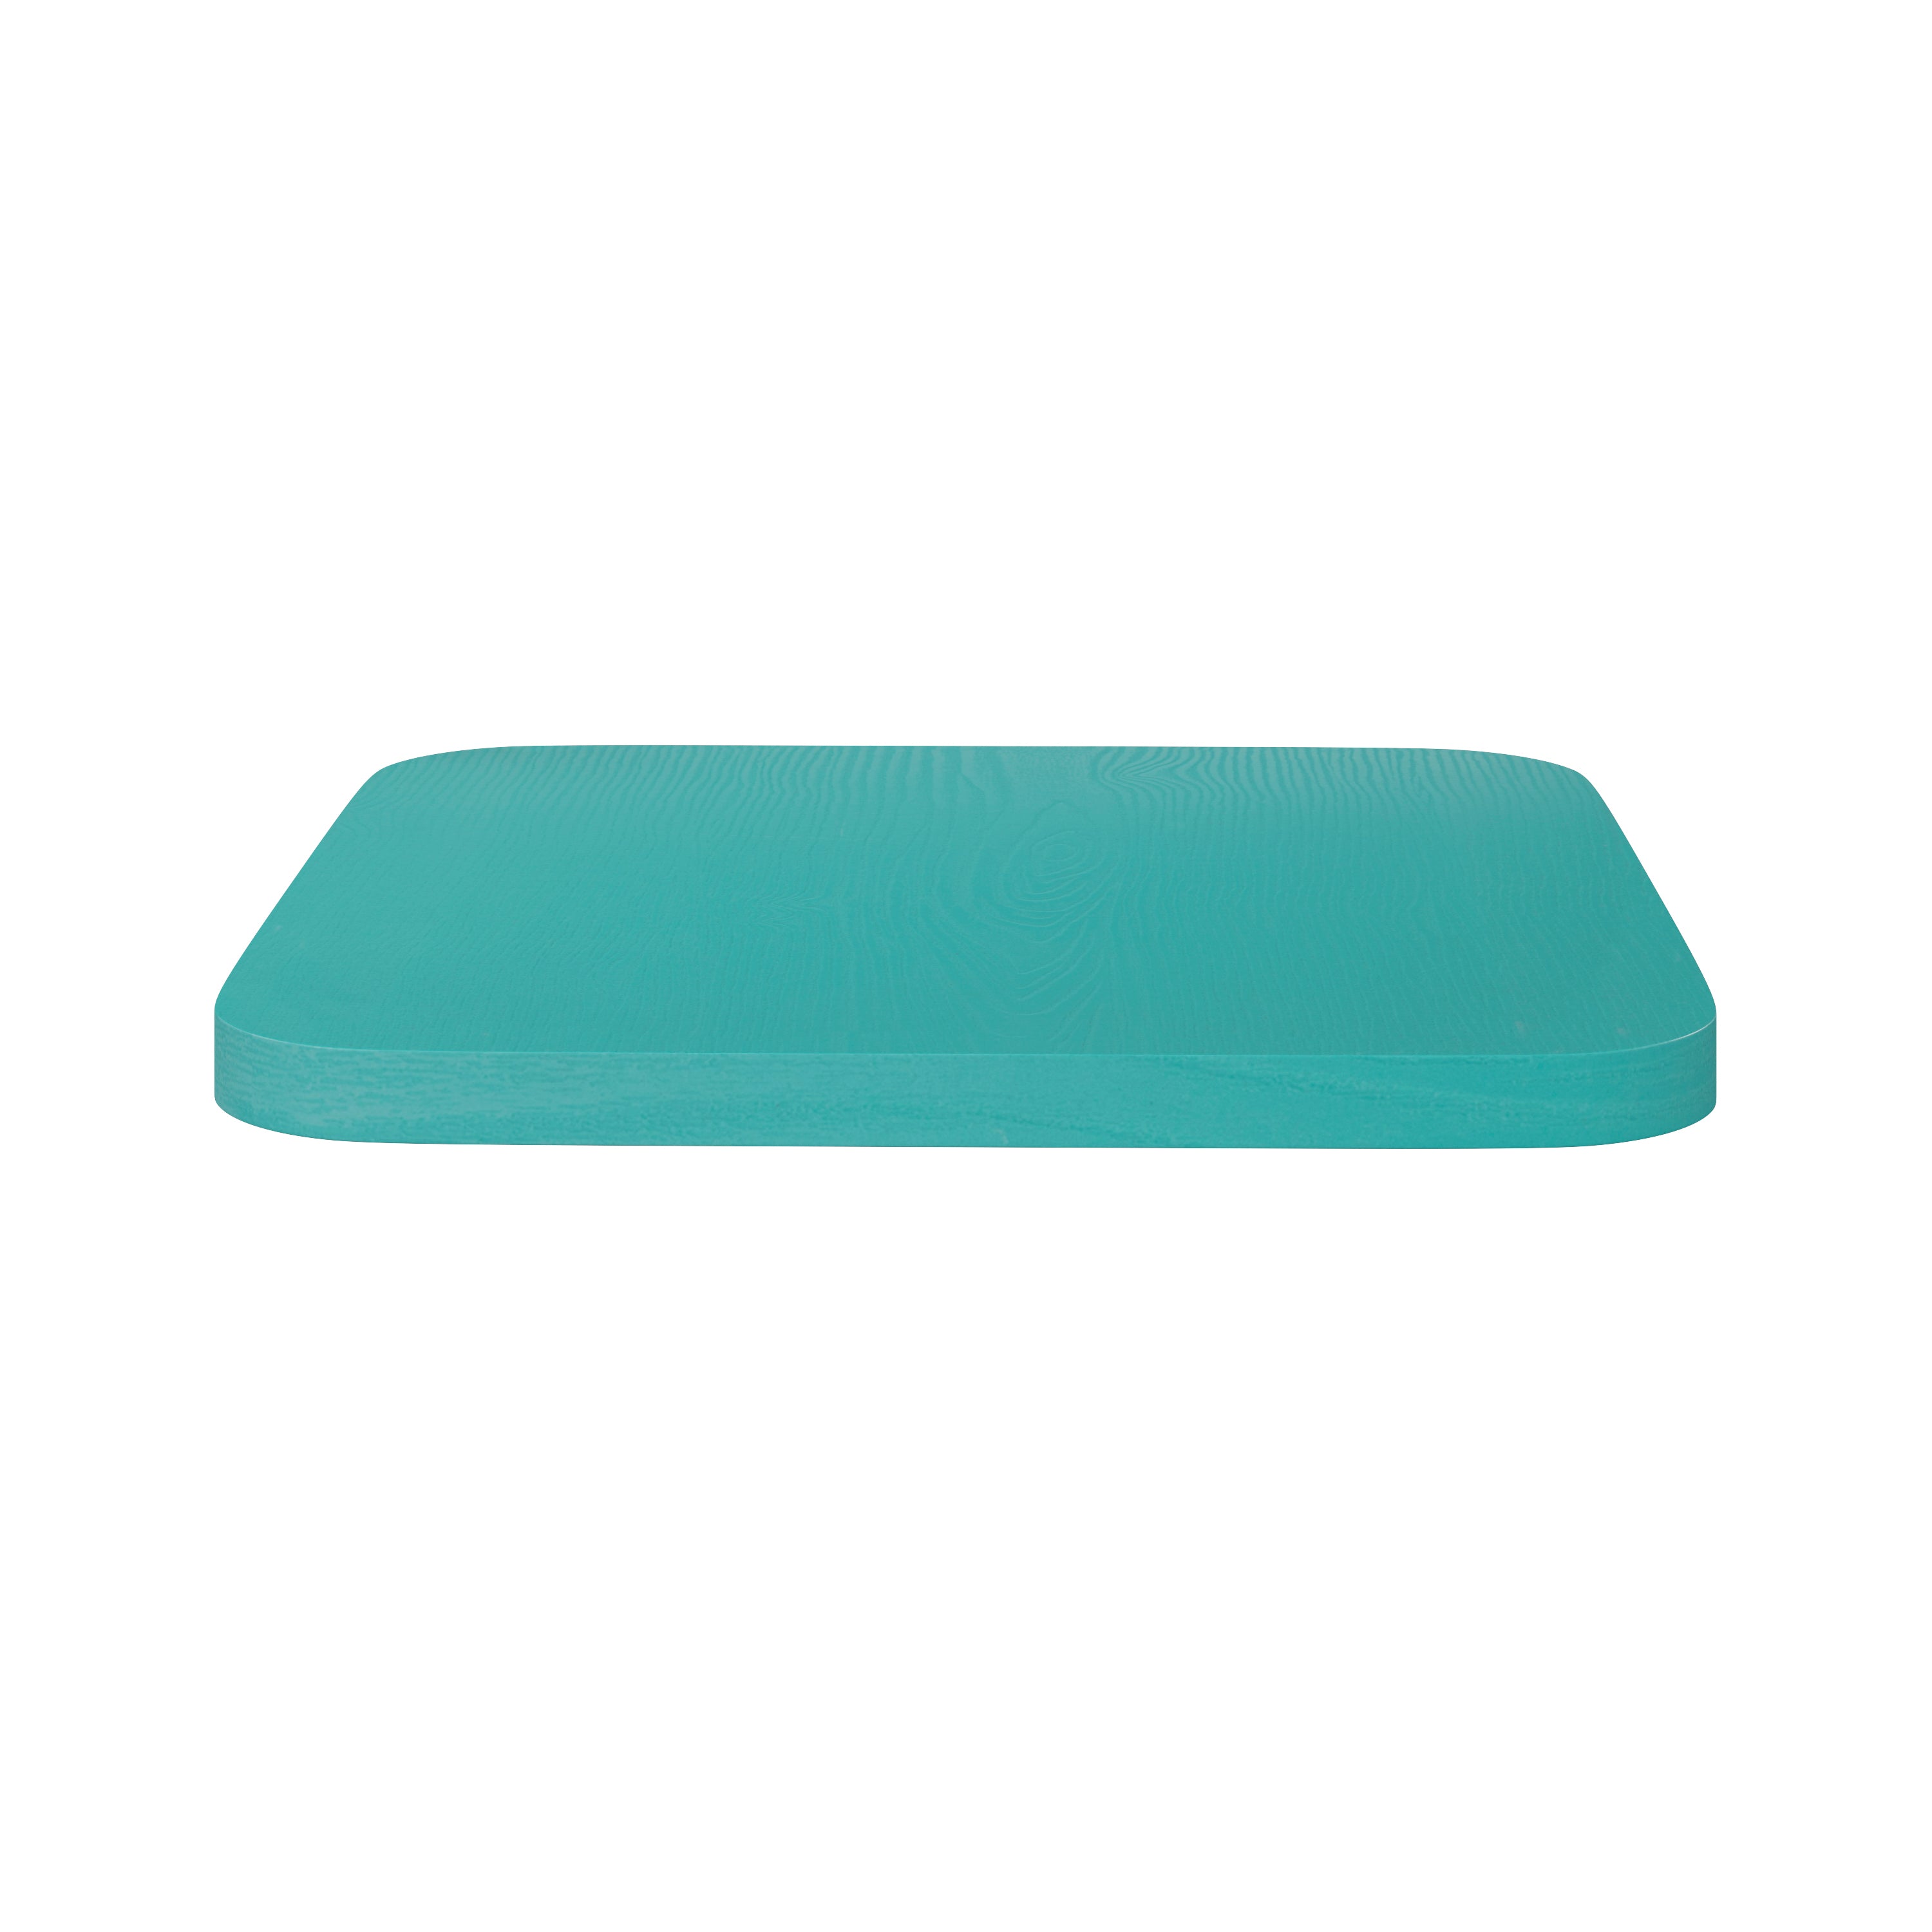 Perry Poly Resin Wood Square Seat with Rounded Edges for Colorful Metal Barstools-Colorful Metal Poly Resin Seats-Flash Furniture-Wall2Wall Furnishings